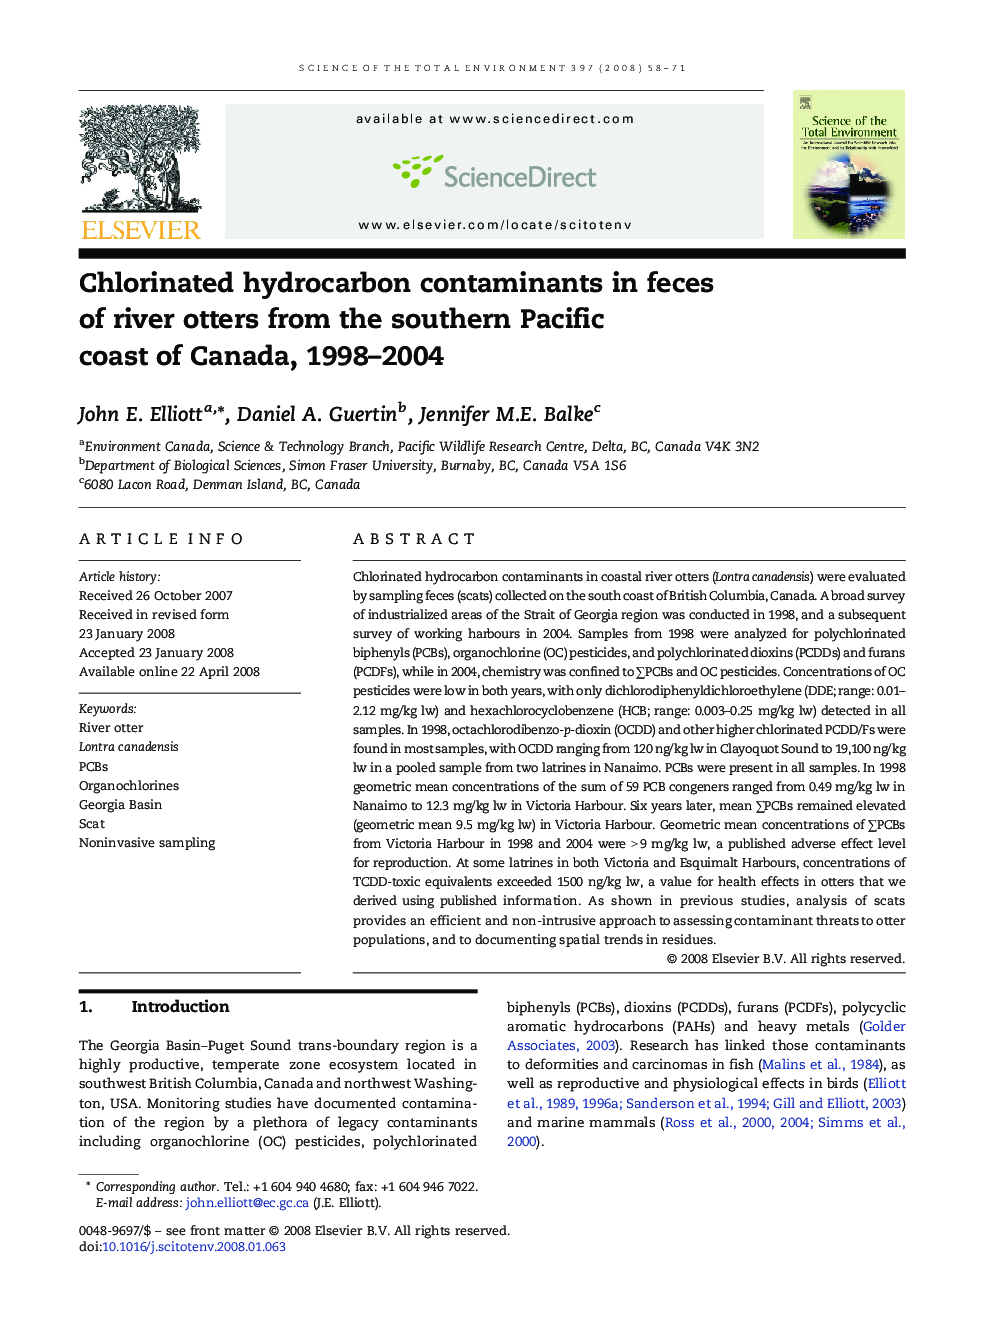 Chlorinated hydrocarbon contaminants in feces of river otters from the southern Pacific coast of Canada, 1998–2004